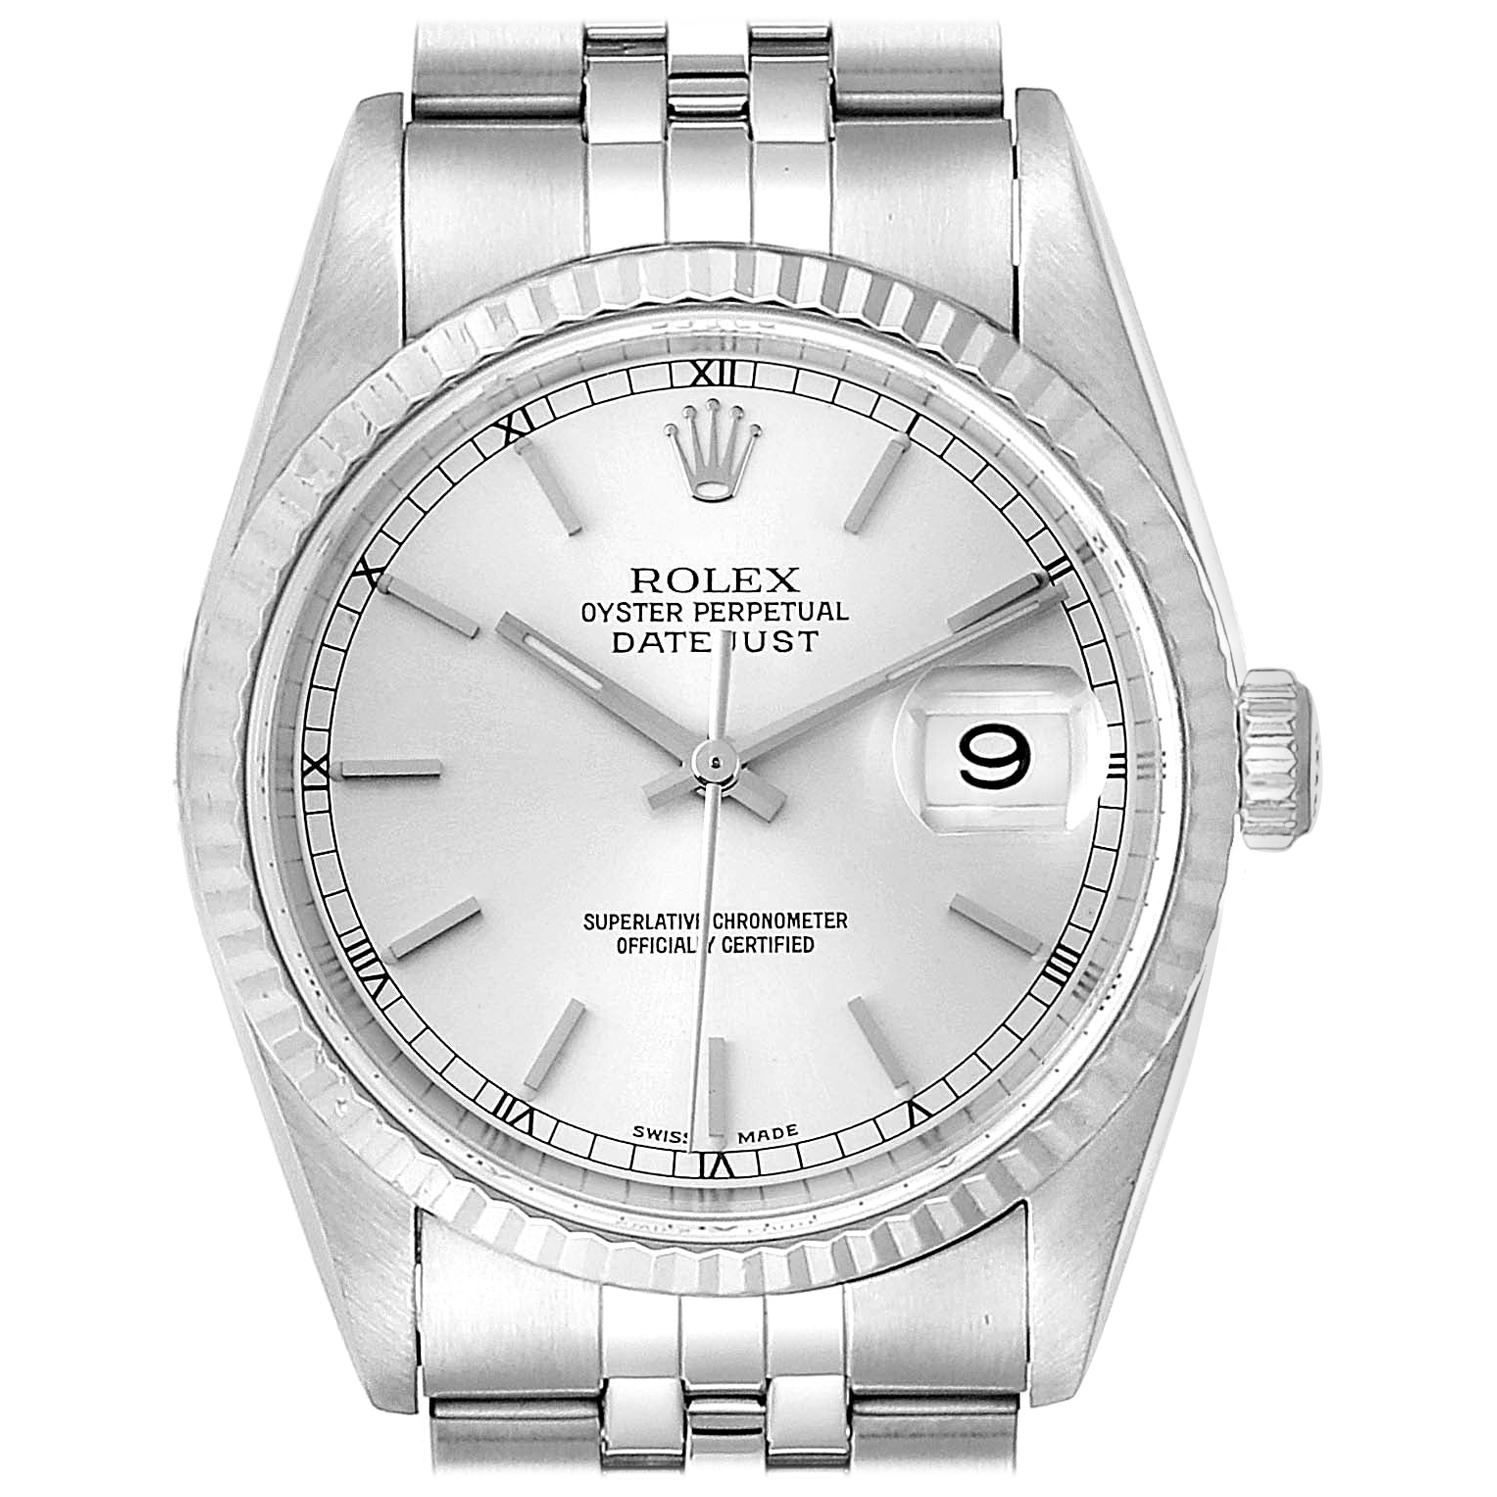 Rolex Datejust 36 Steel White Gold Tapestry Dial Men's Watch 16234 For Sale